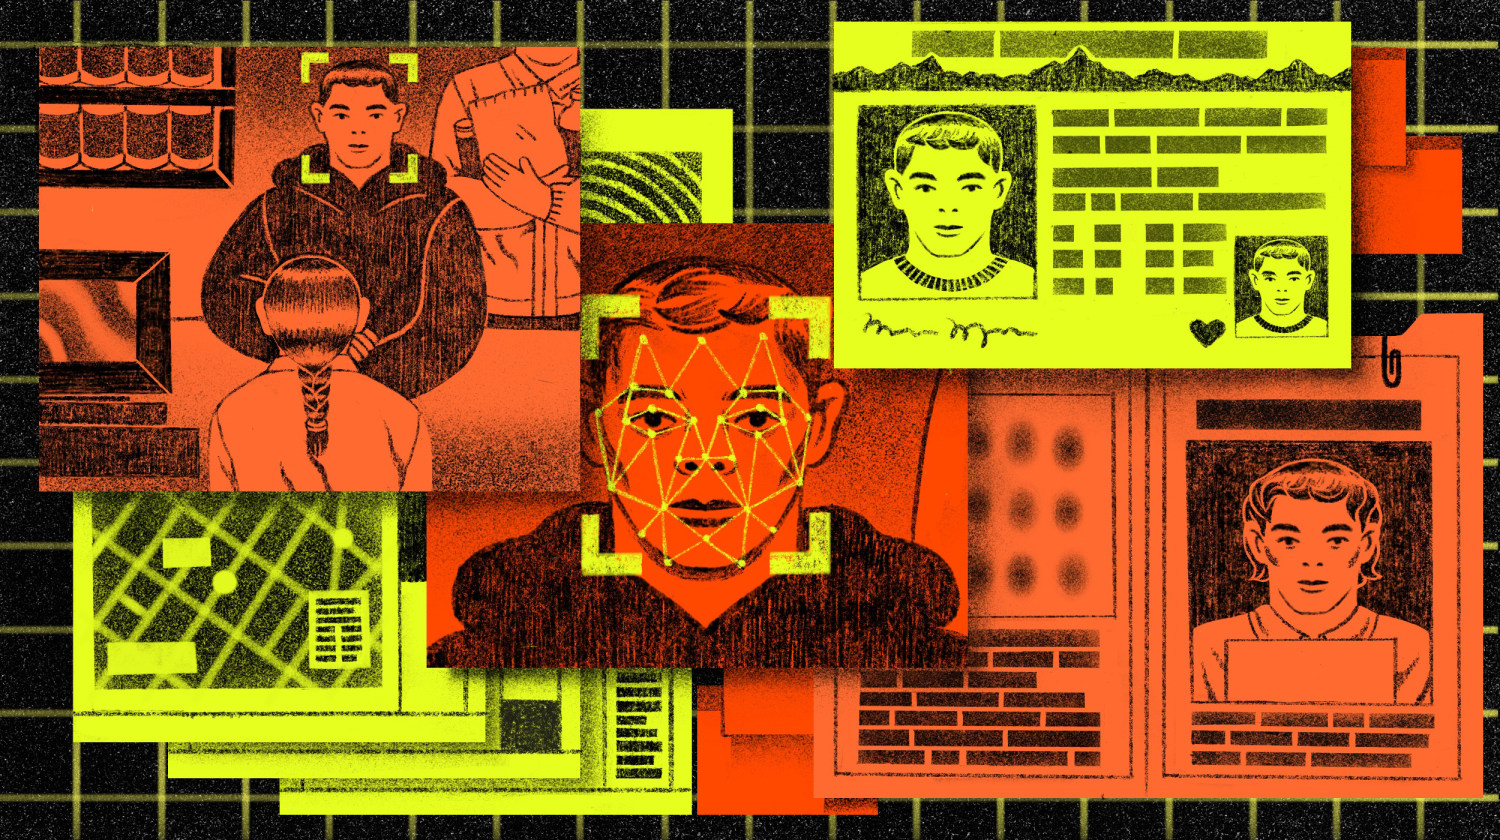 How facial recognition became a routine policing tool in America